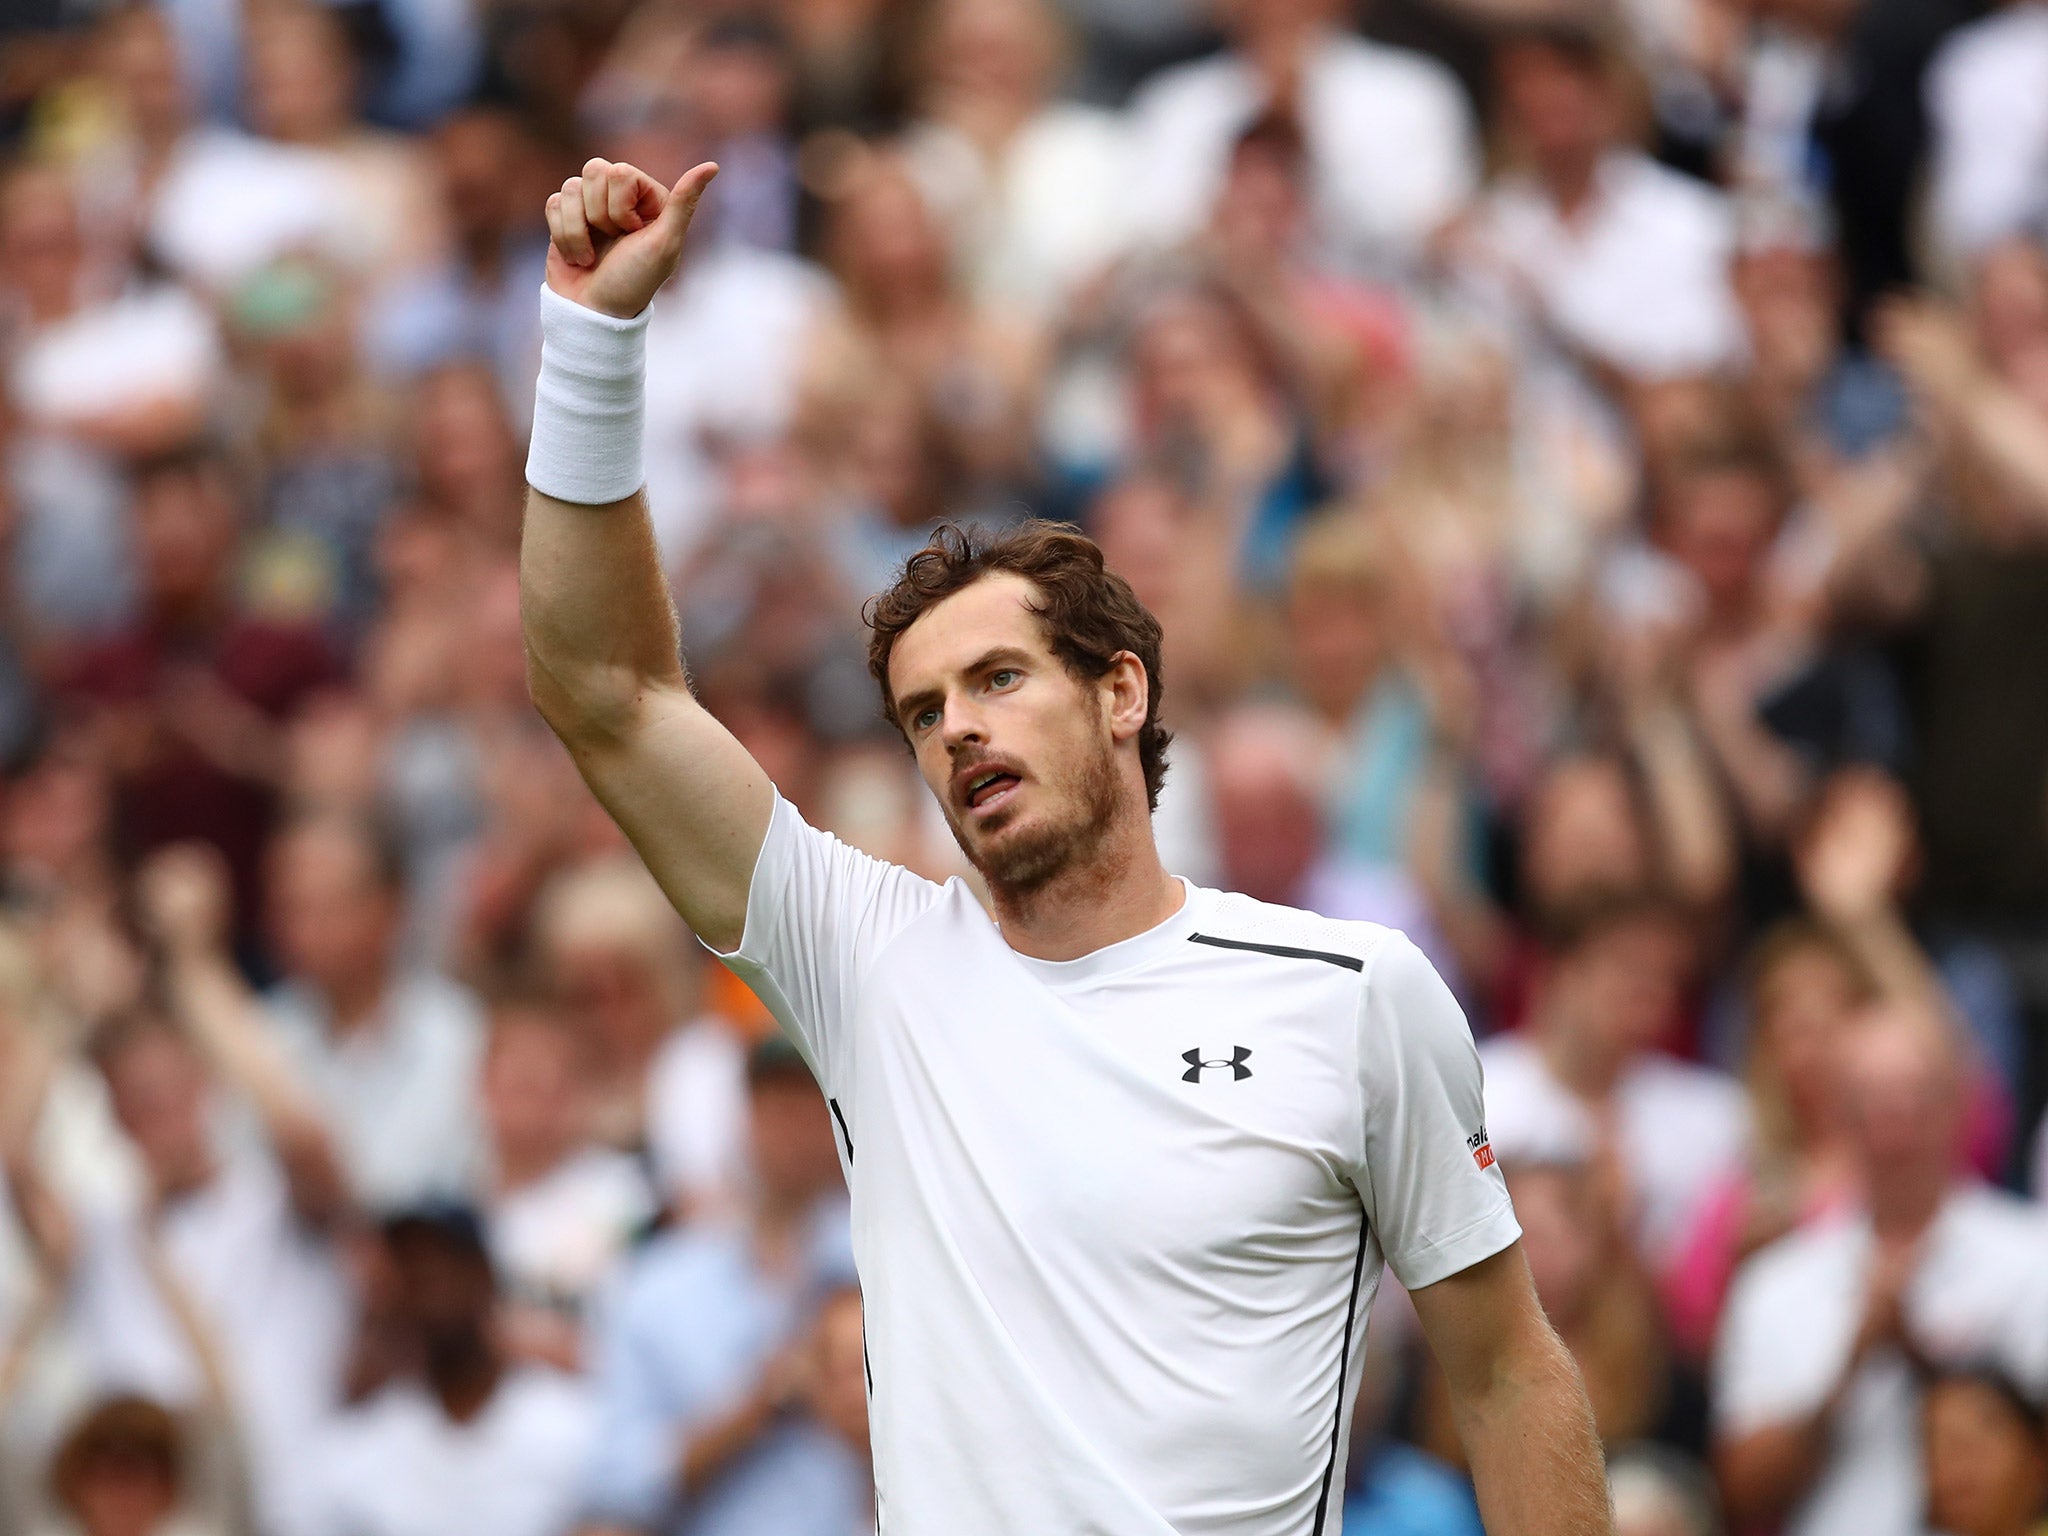 Andy Murray salutes the crowd after his first-round victory over Liam Broady